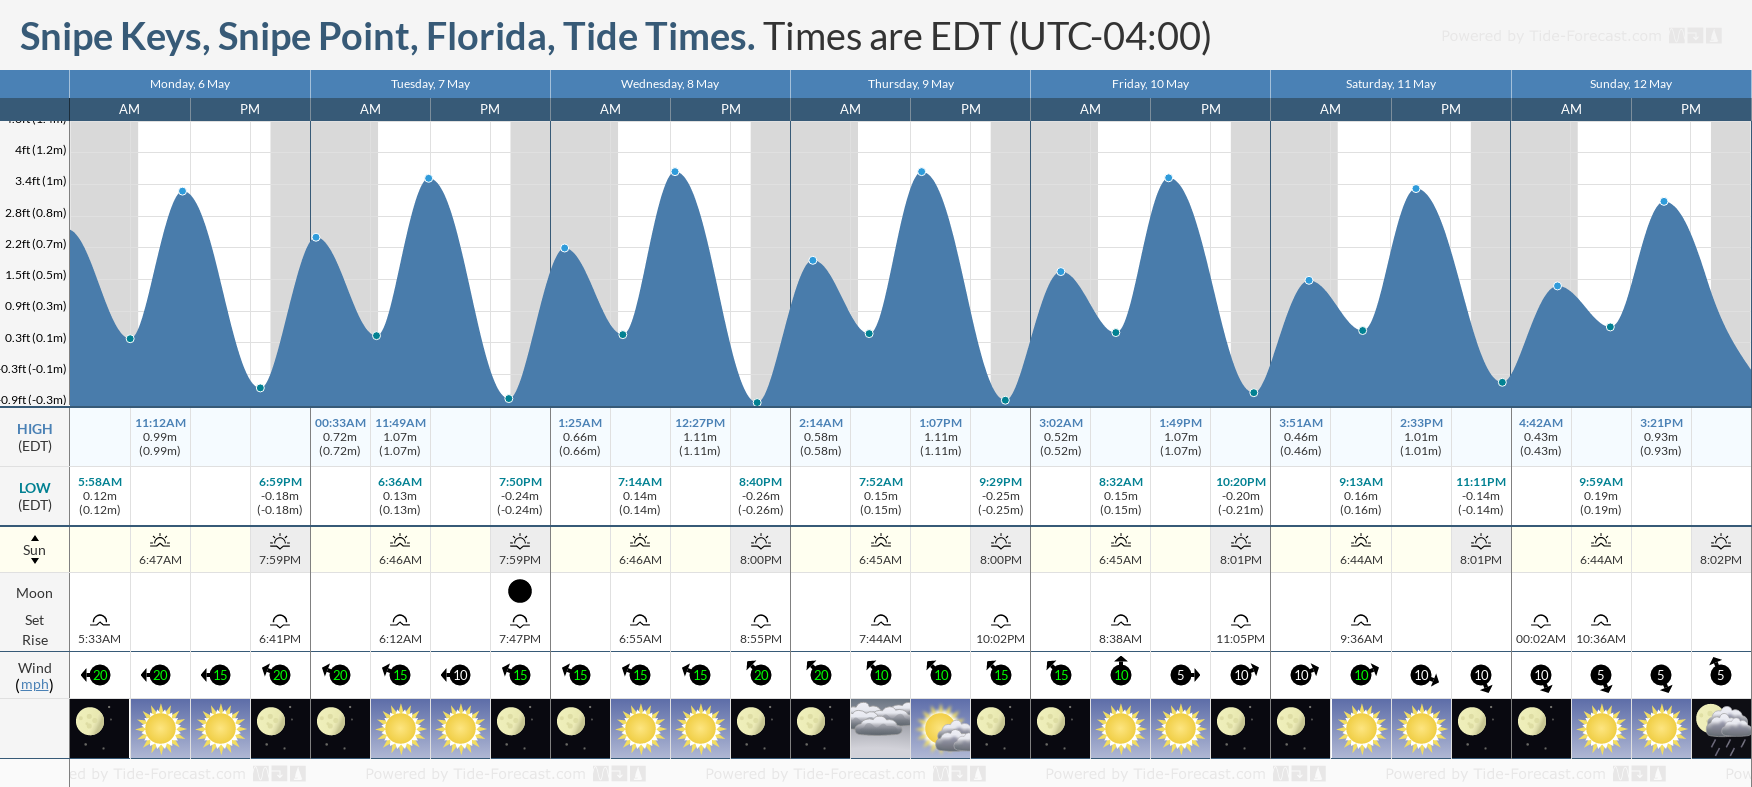 Snipe Keys, Snipe Point, Florida Tide Chart including high and low tide tide times for the next 7 days